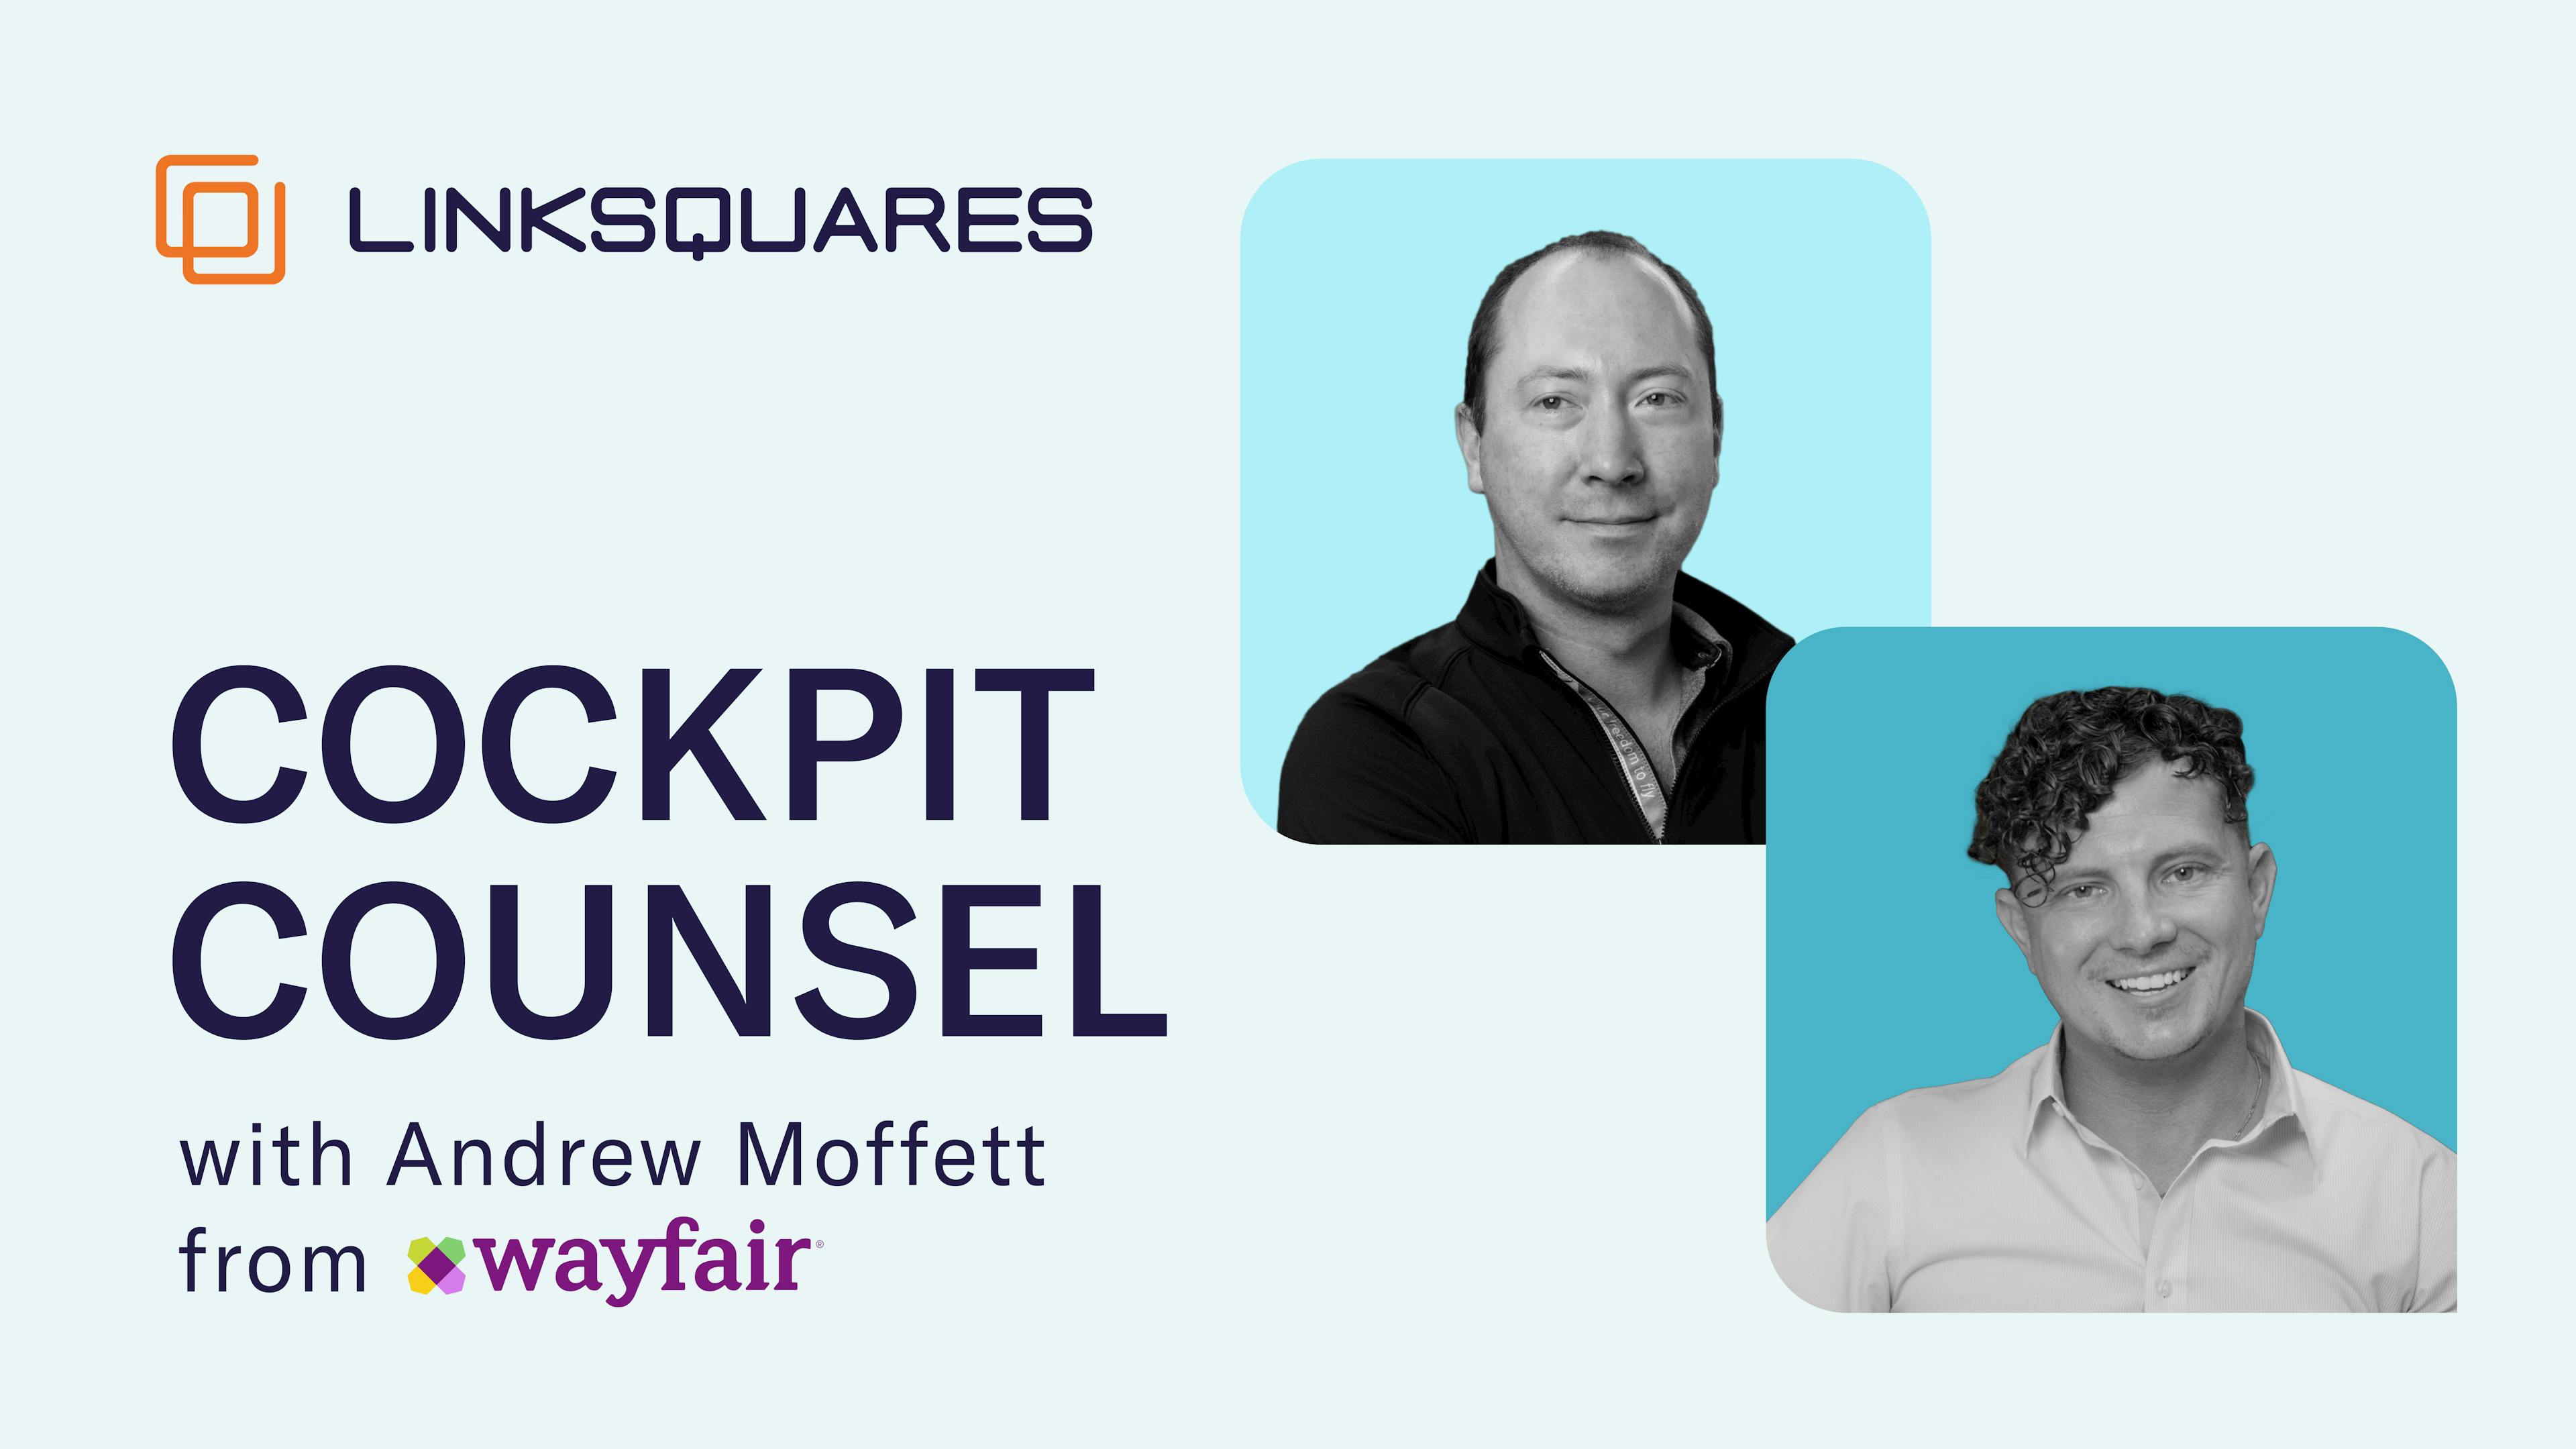 Cockpit Counsel: Legal Tech Talk with Andrew Moffett from Wayfair